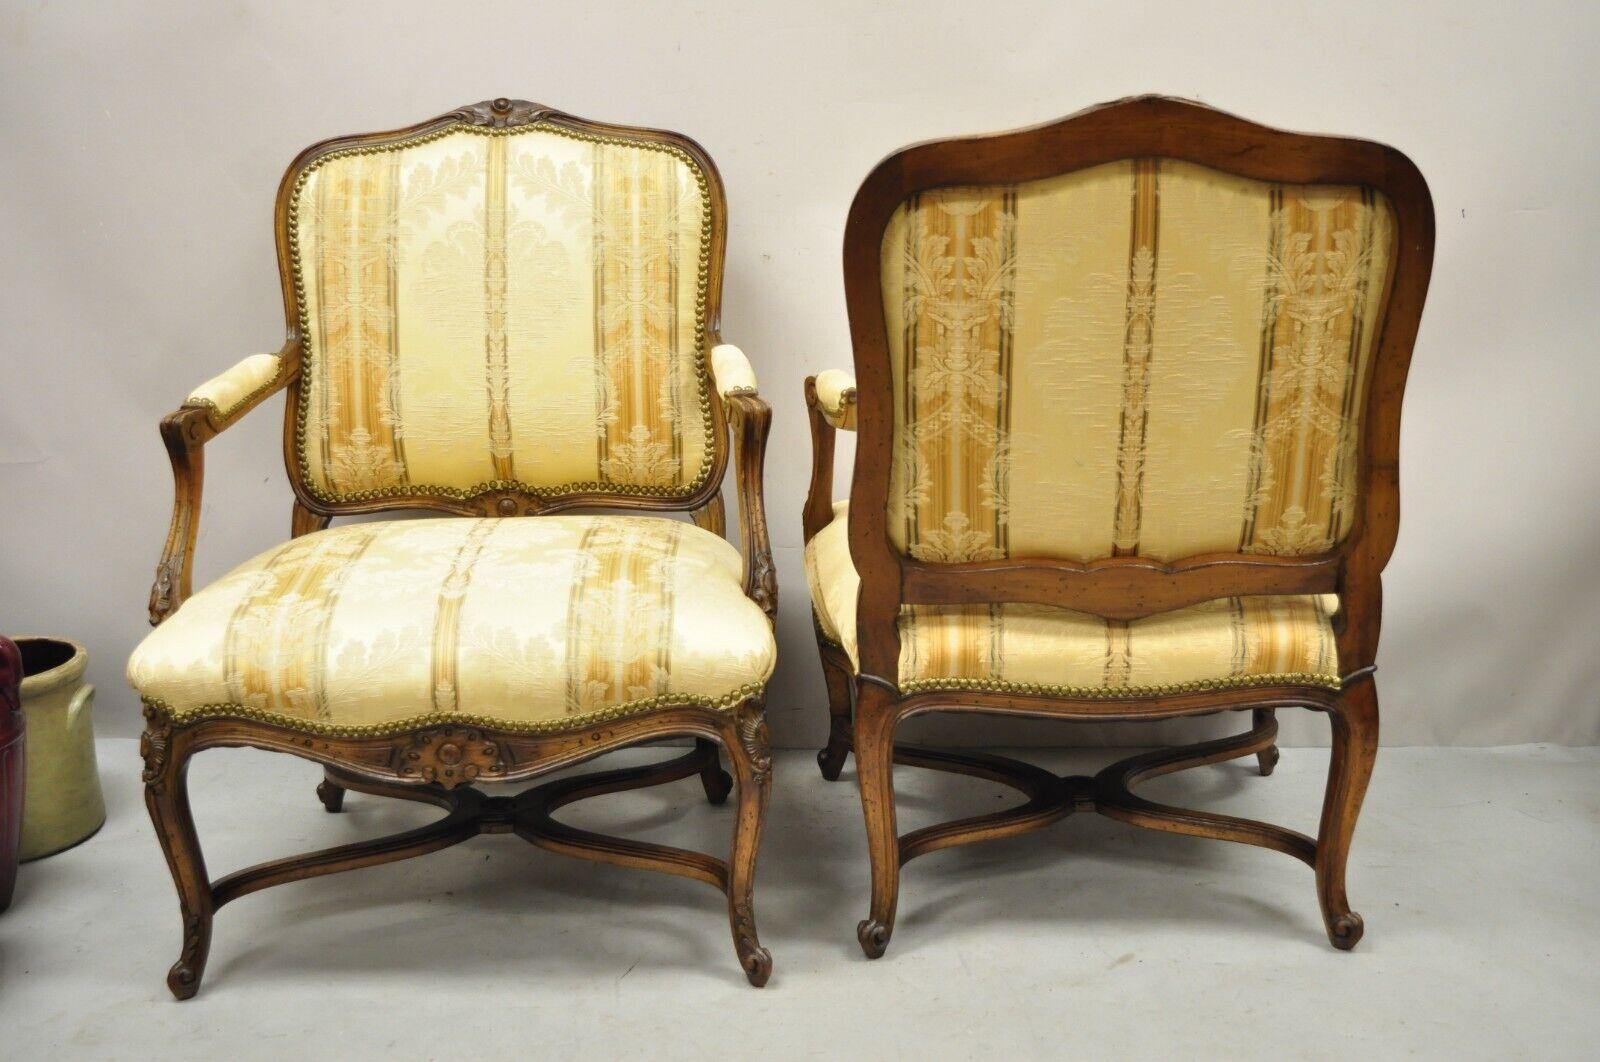 Vintage French Provincial Louis XV Country Style Lounge Chairs - a Pair For Sale 5